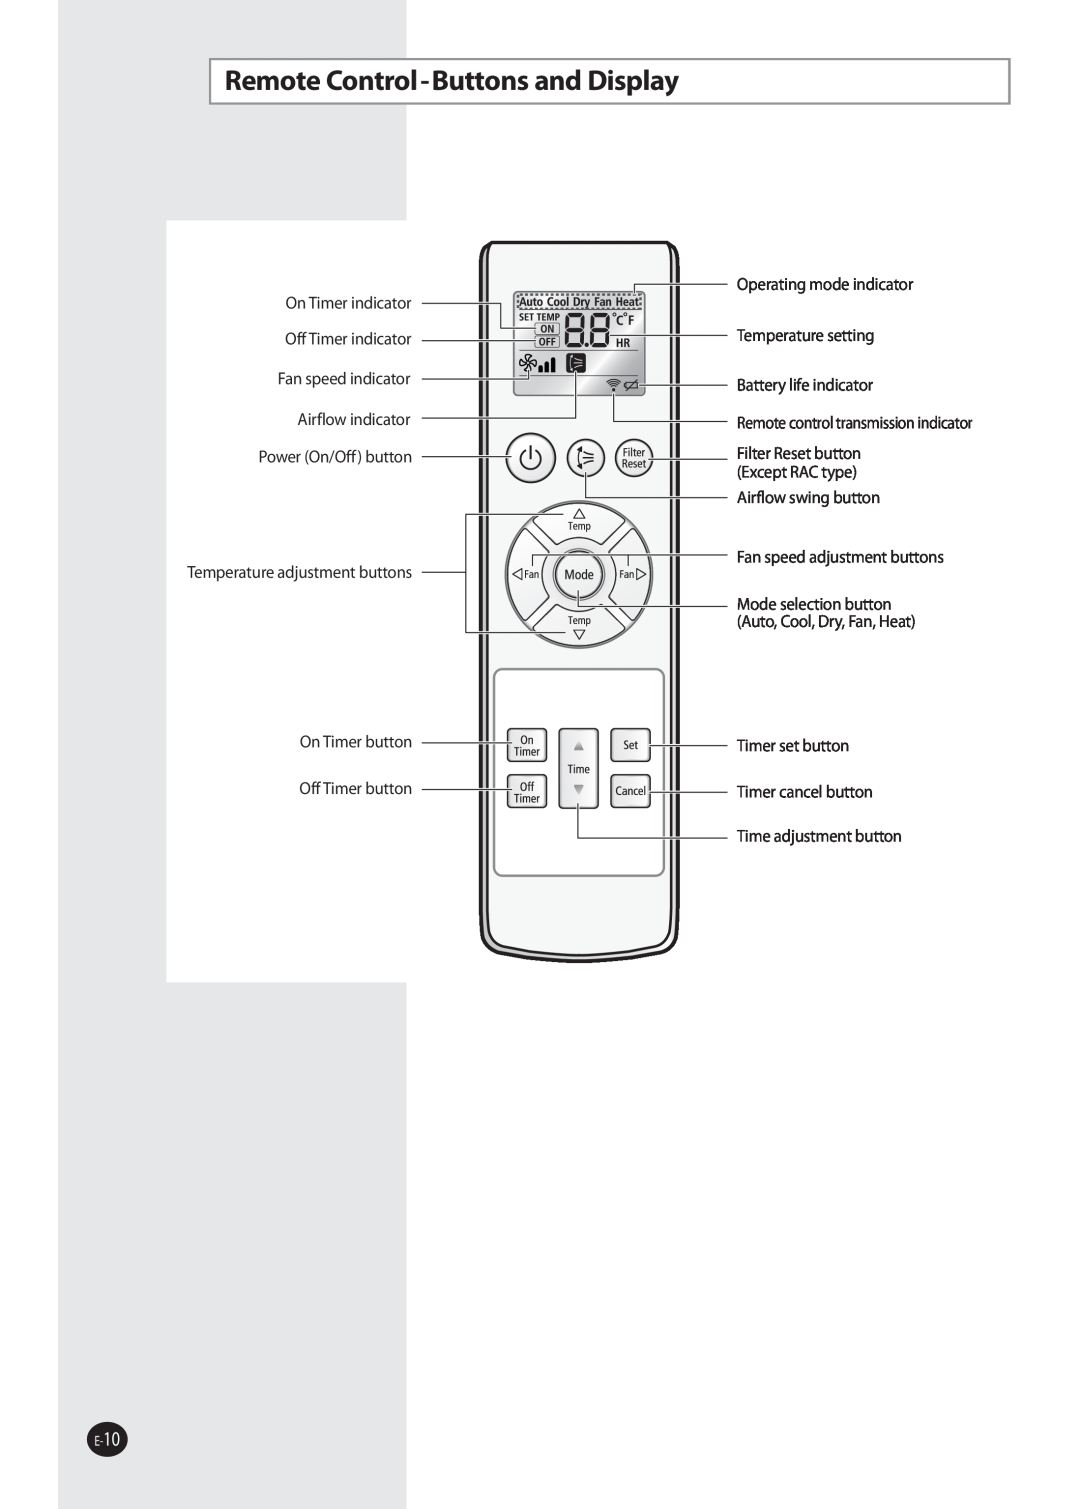 Samsung NS052NHXEA, NS035NHXEA, NS070NHXEA, NS026NHXEA manual Remote Control-Buttonsand Display 